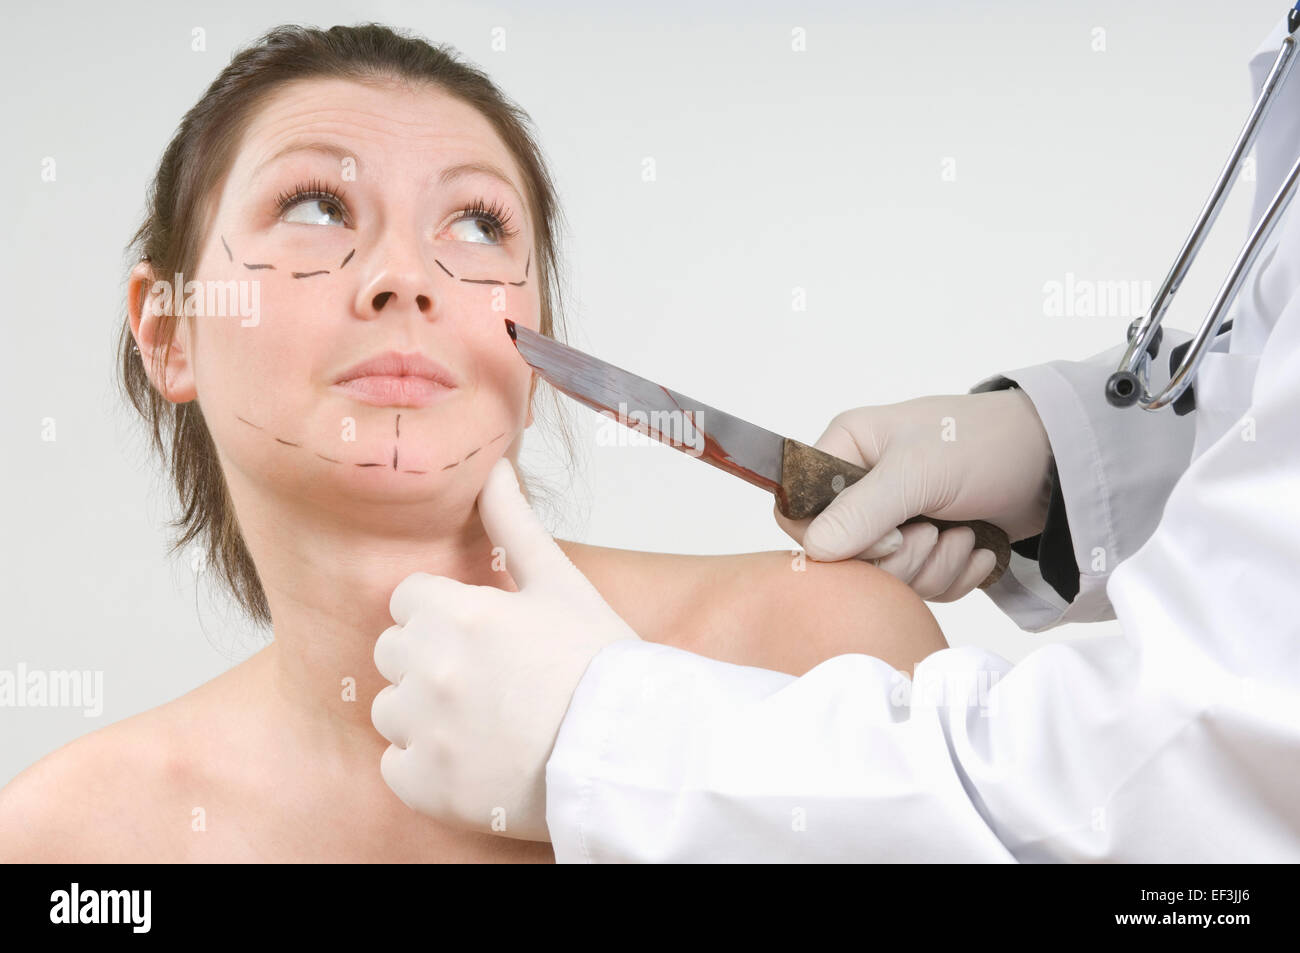 Doctor holding a bloody knife in front of woman's face Stock Photo